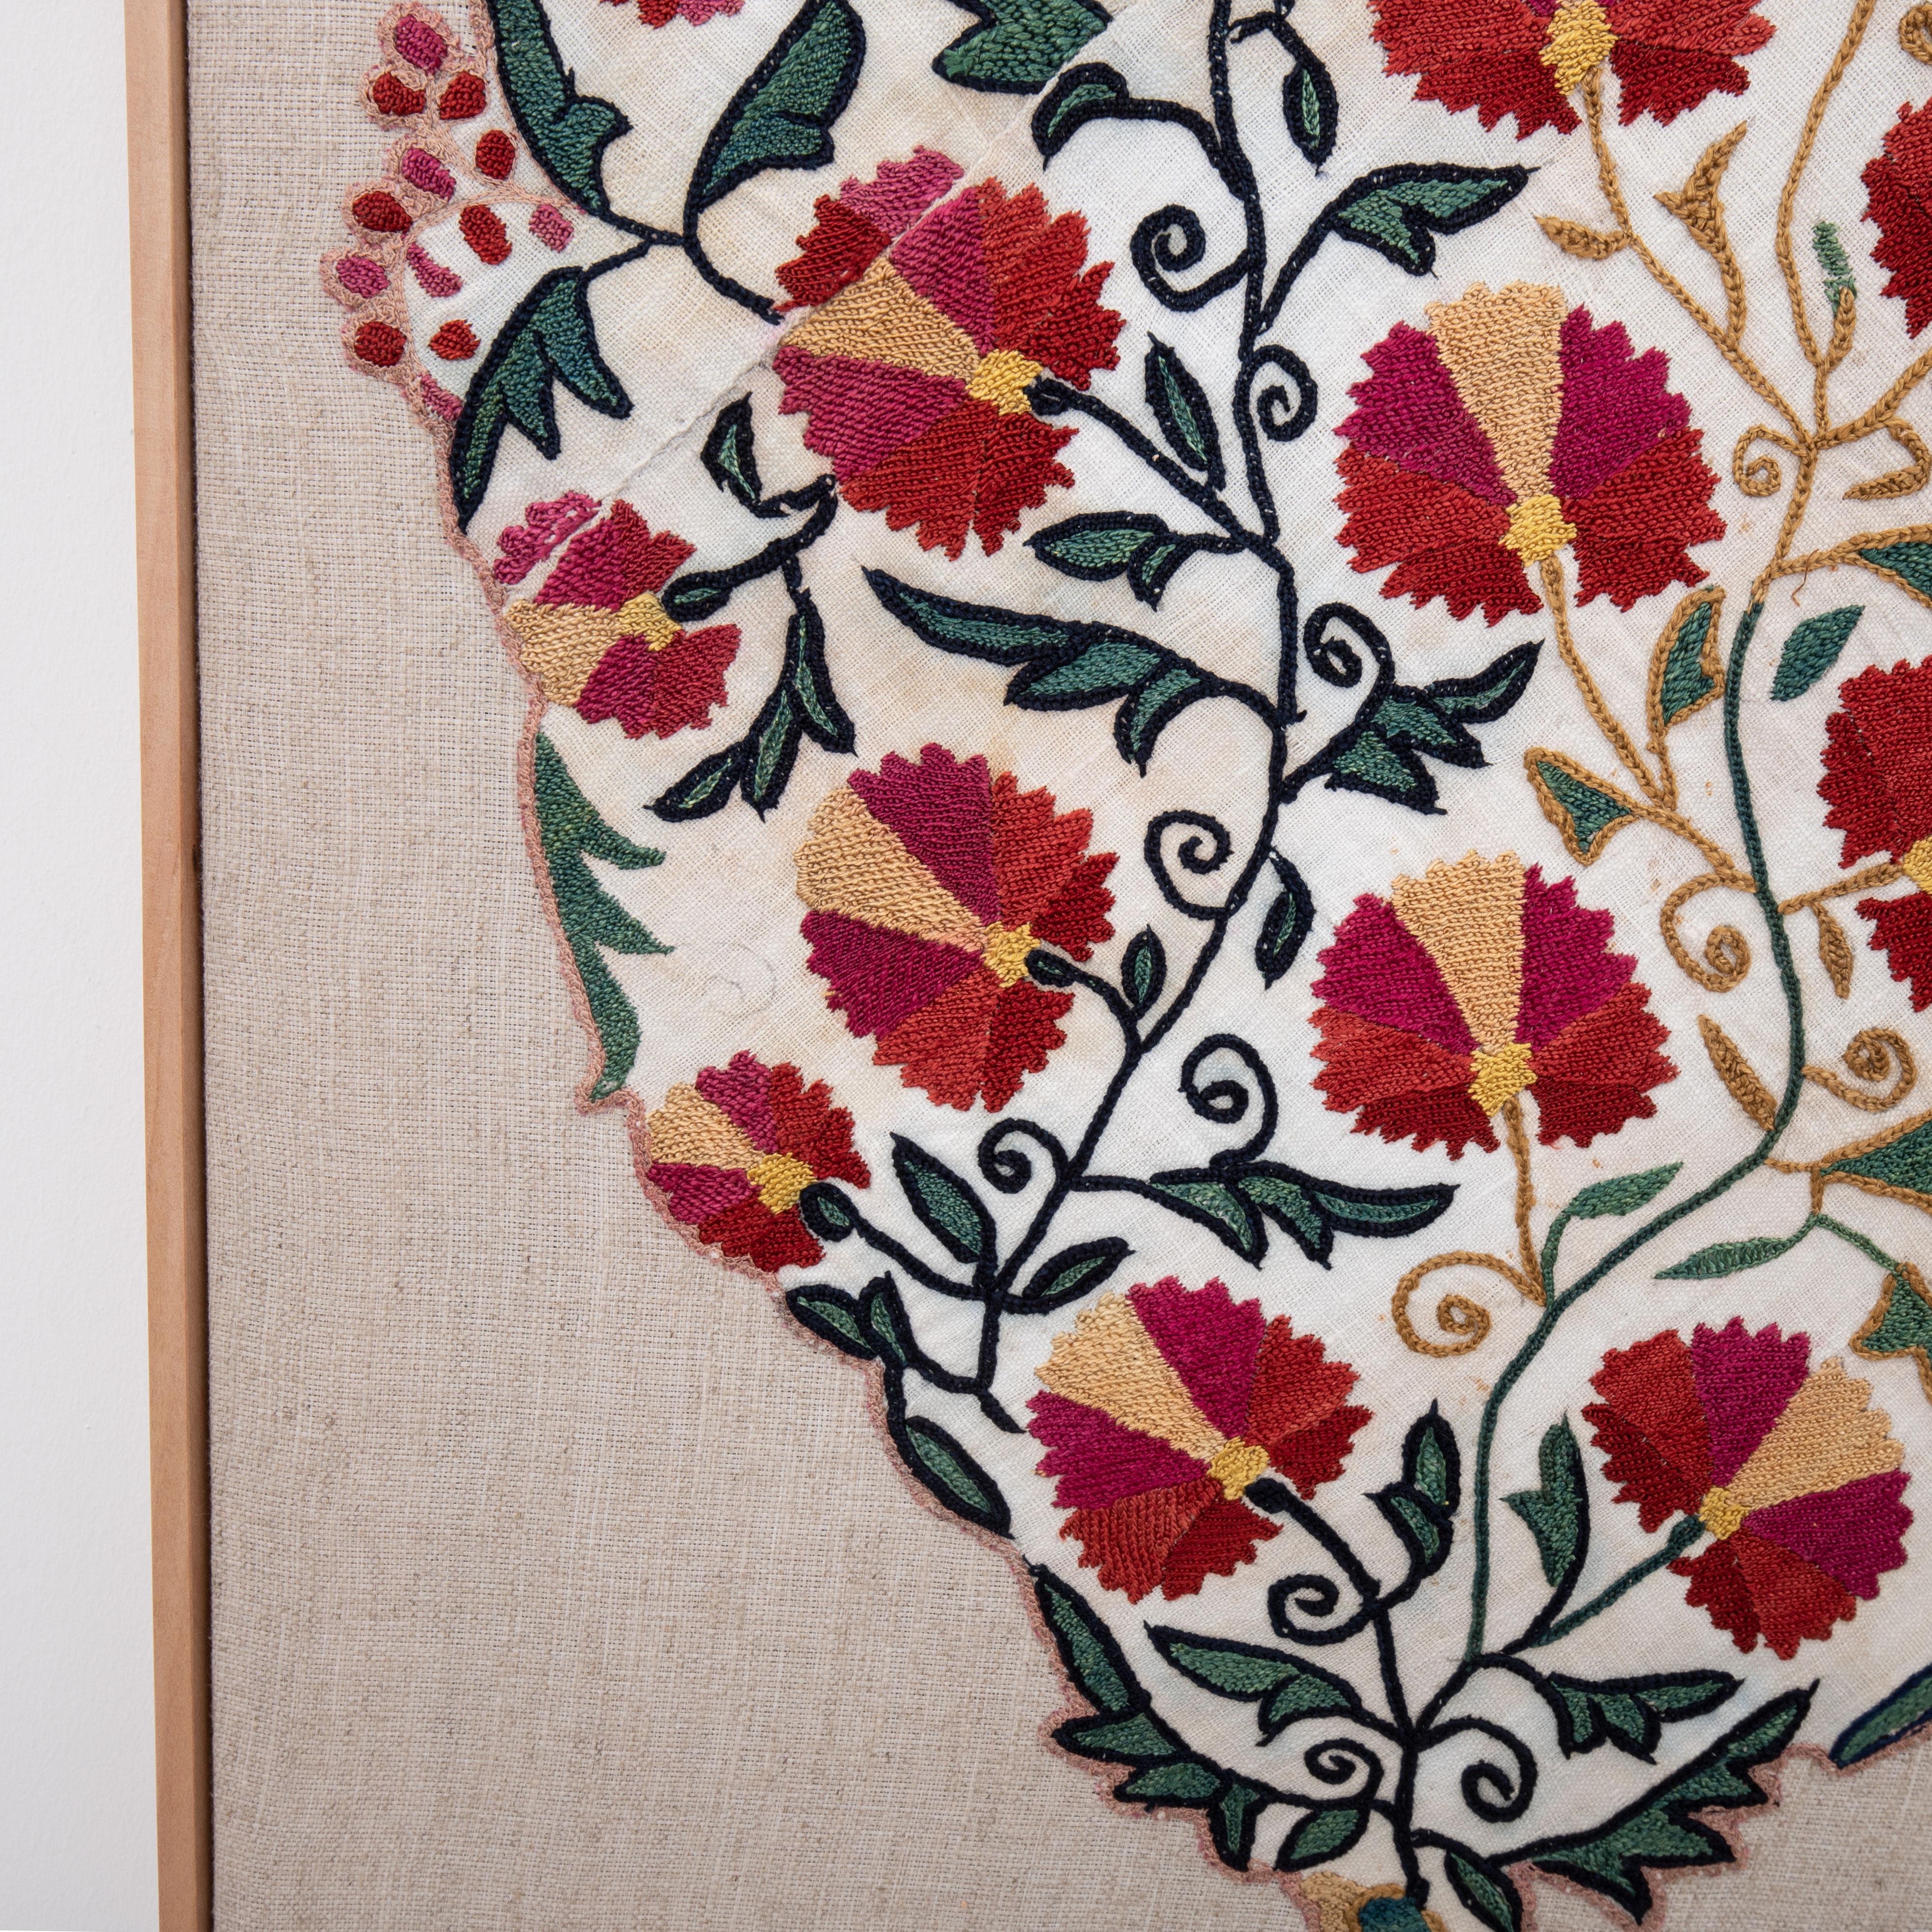 Embroidered Professionally Framed Antique Nurata Suzani Fragment, 19th C.